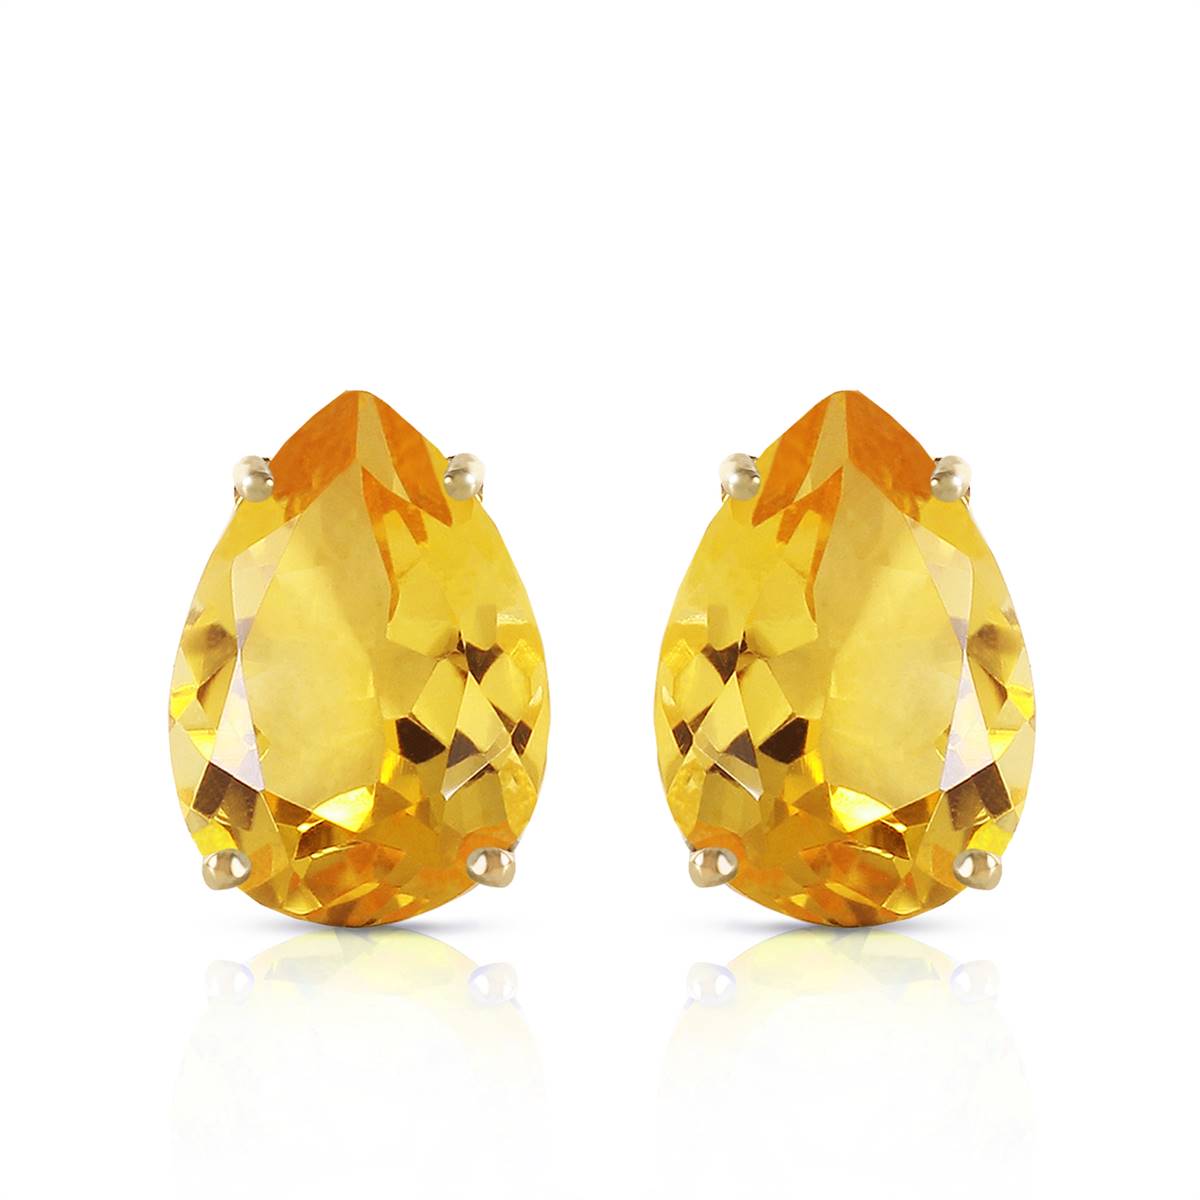 10 Carat 14K Solid Yellow Gold Inspiration Citrine Earrings